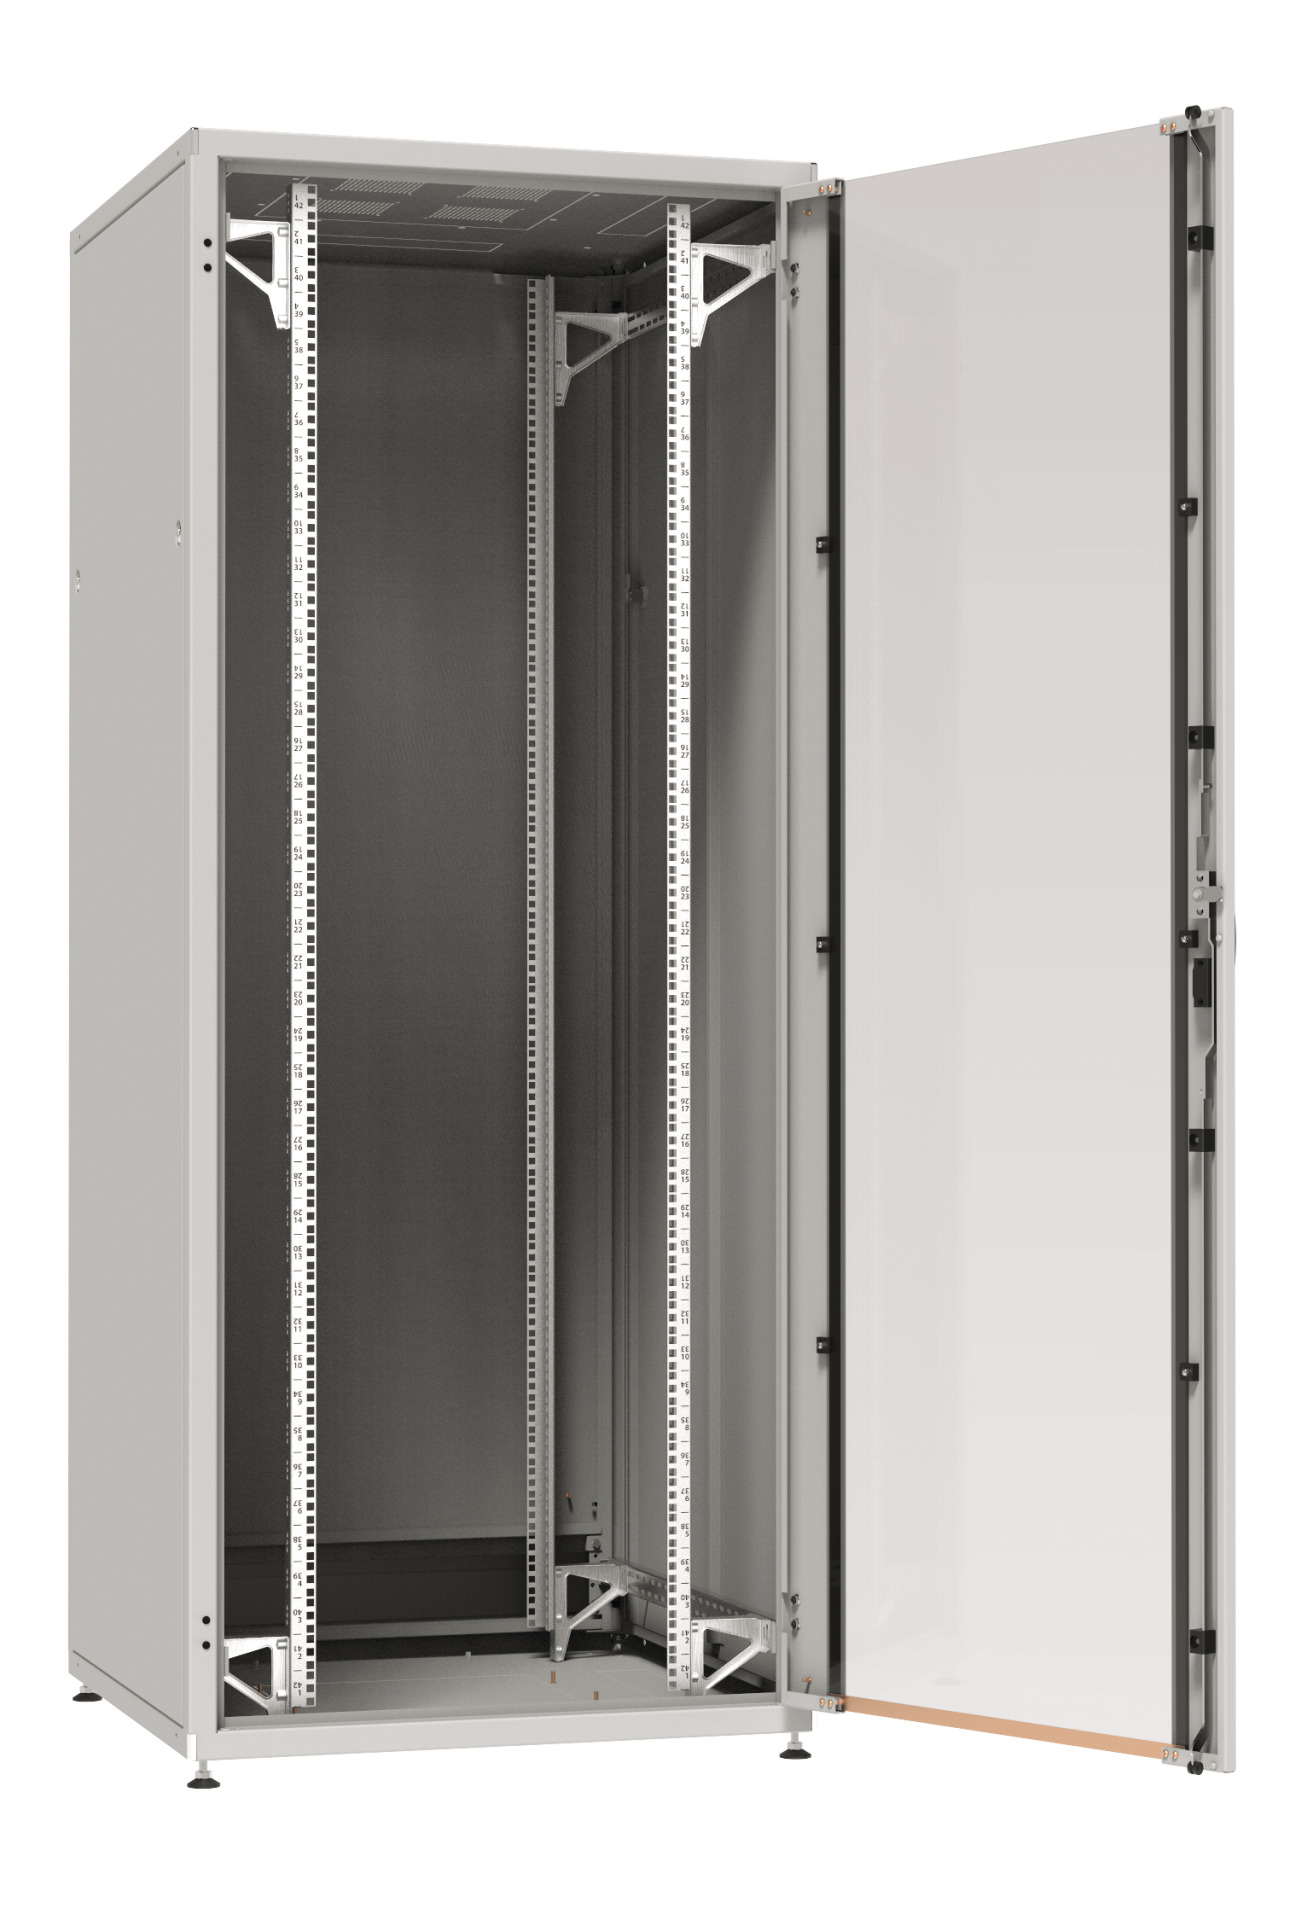 19" Network Cabinet PRO 42U, 800x800 mm, RAL7035, Rear Door with Turning Handle